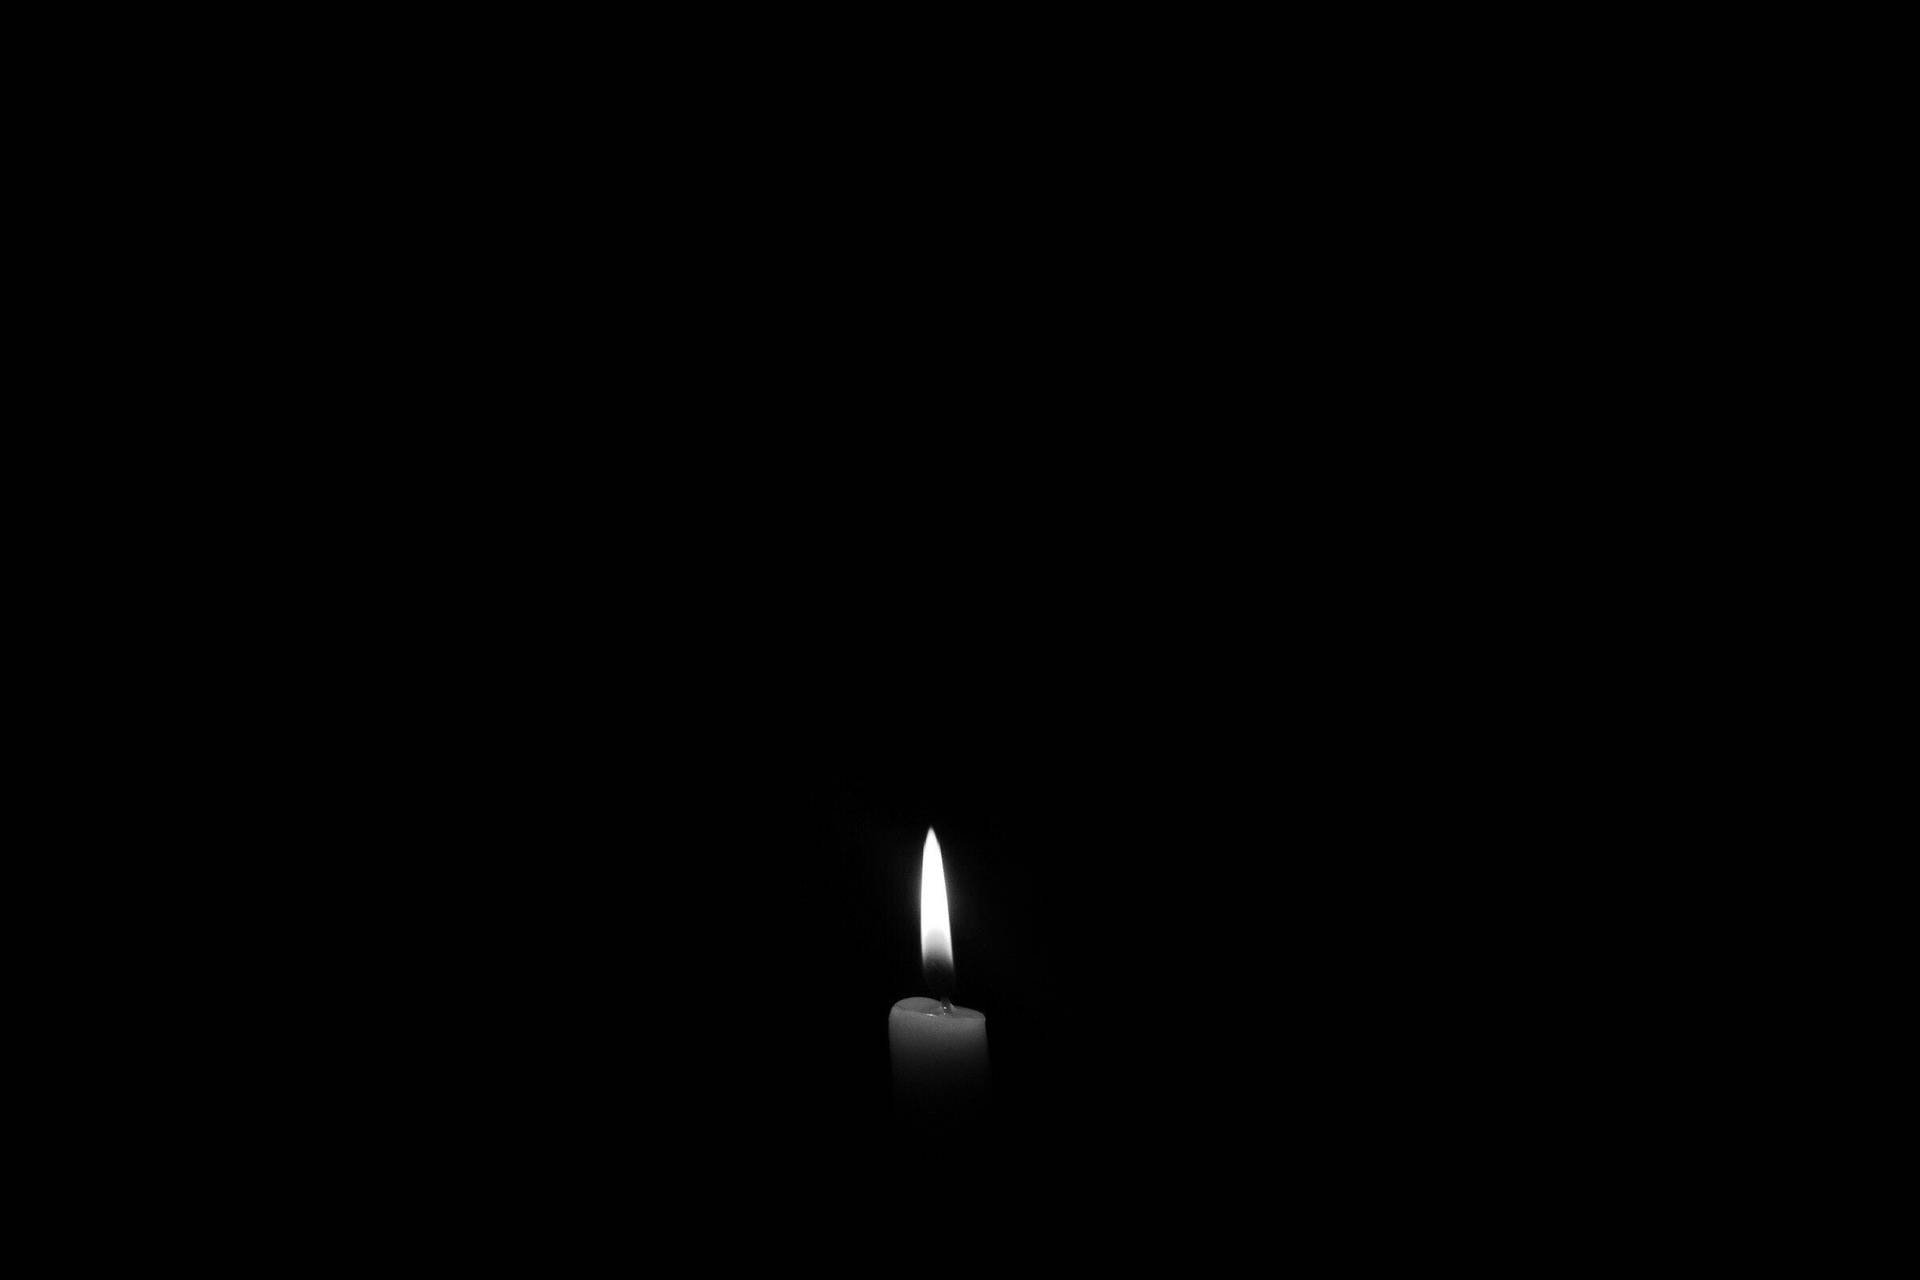 White Lit Candle Over Dark Screen